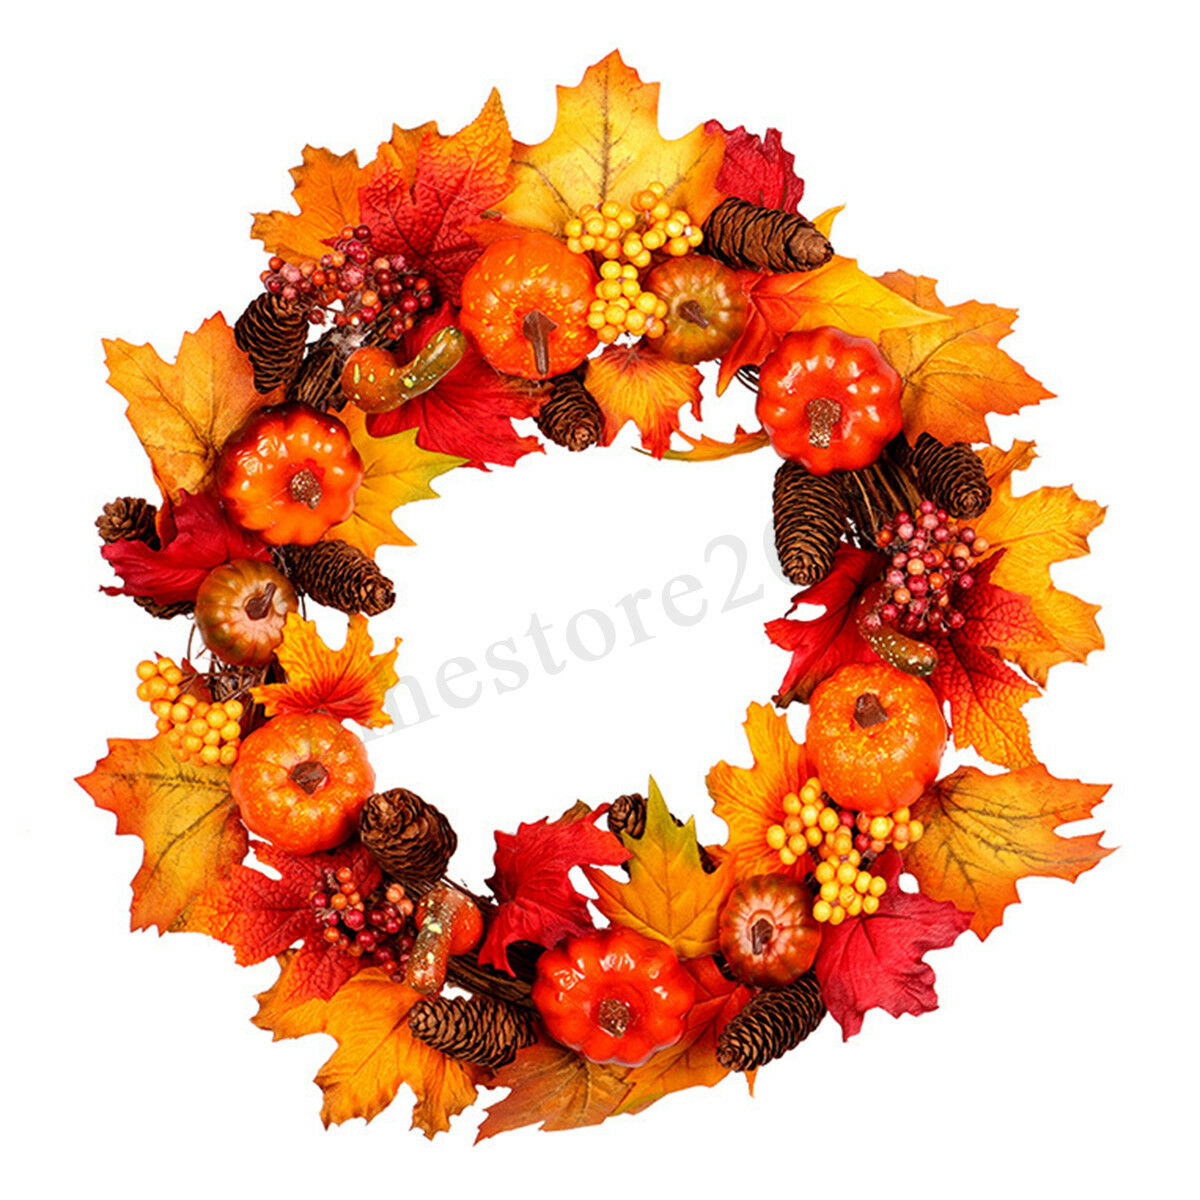 4560cm-Wreath-Garland-Maple-Leaves-Pumpkin-Door-For-Christmas-Party-Decorations-1637102-2